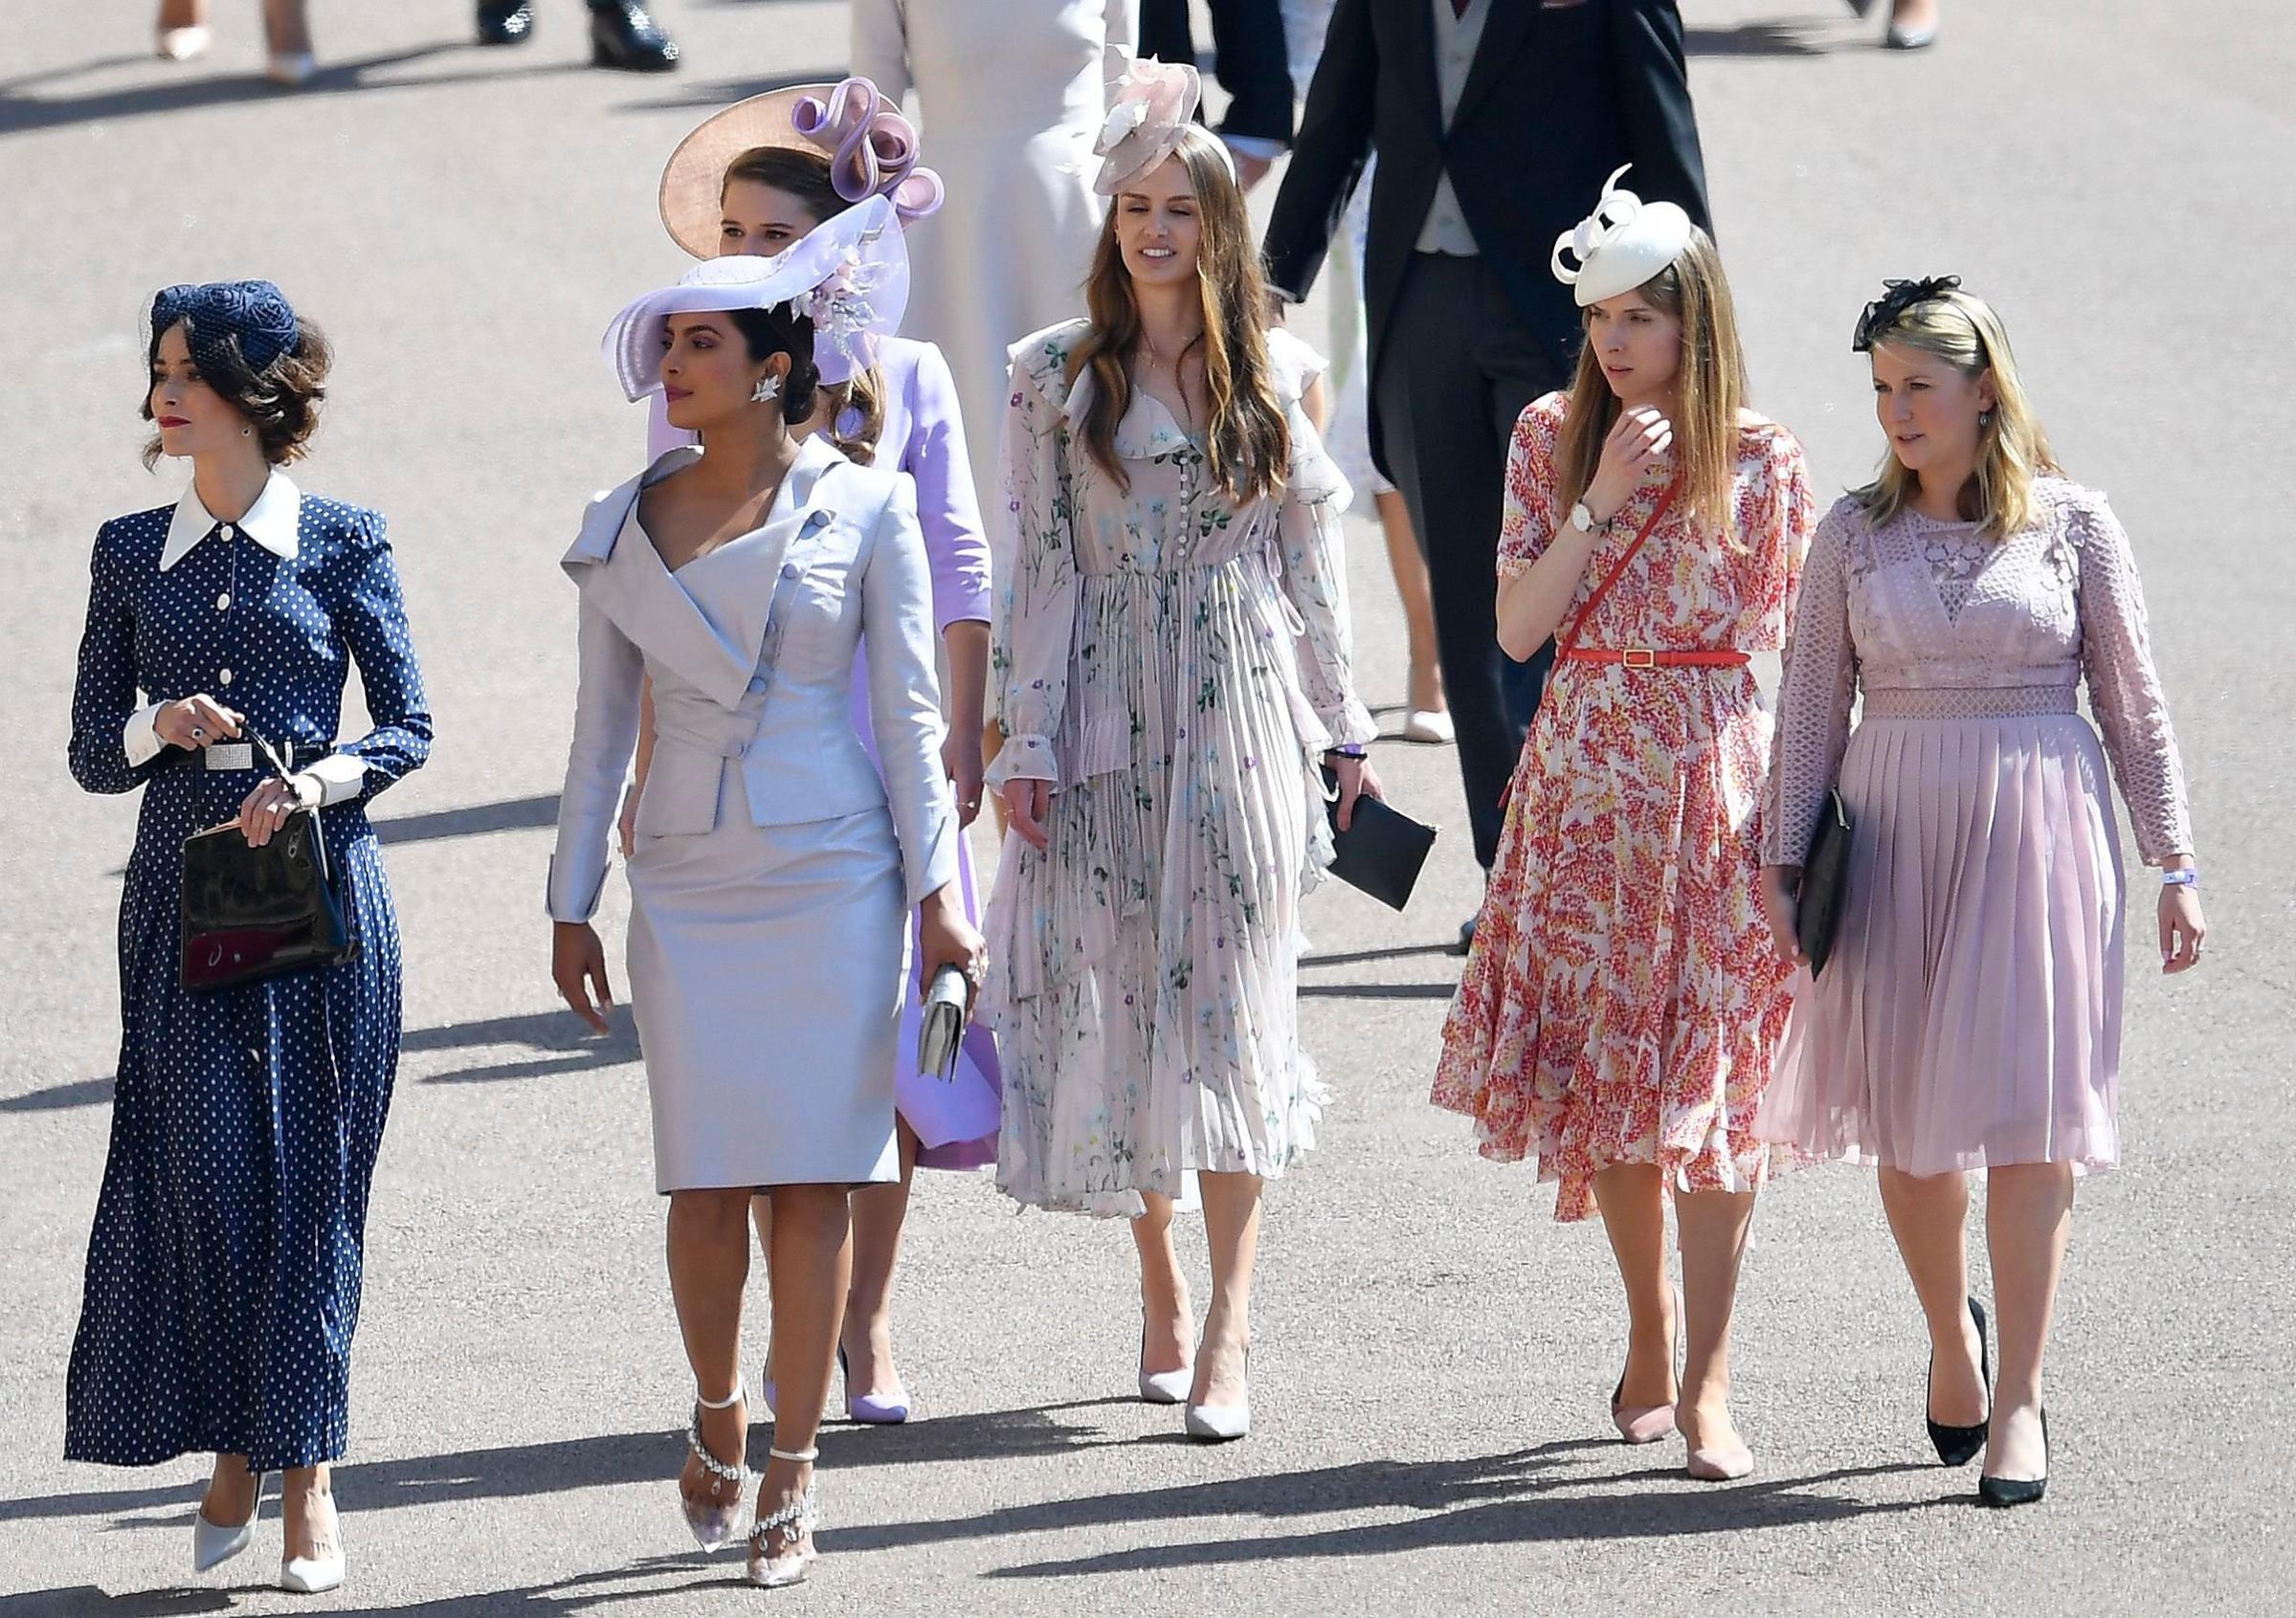 Priyanka Chopra (second from left) arrives for the royal wedding ceremony of Britain's Prince Harry and Meghan Markle at St George's Chapel in Windsor Castle, May 19, 2018.